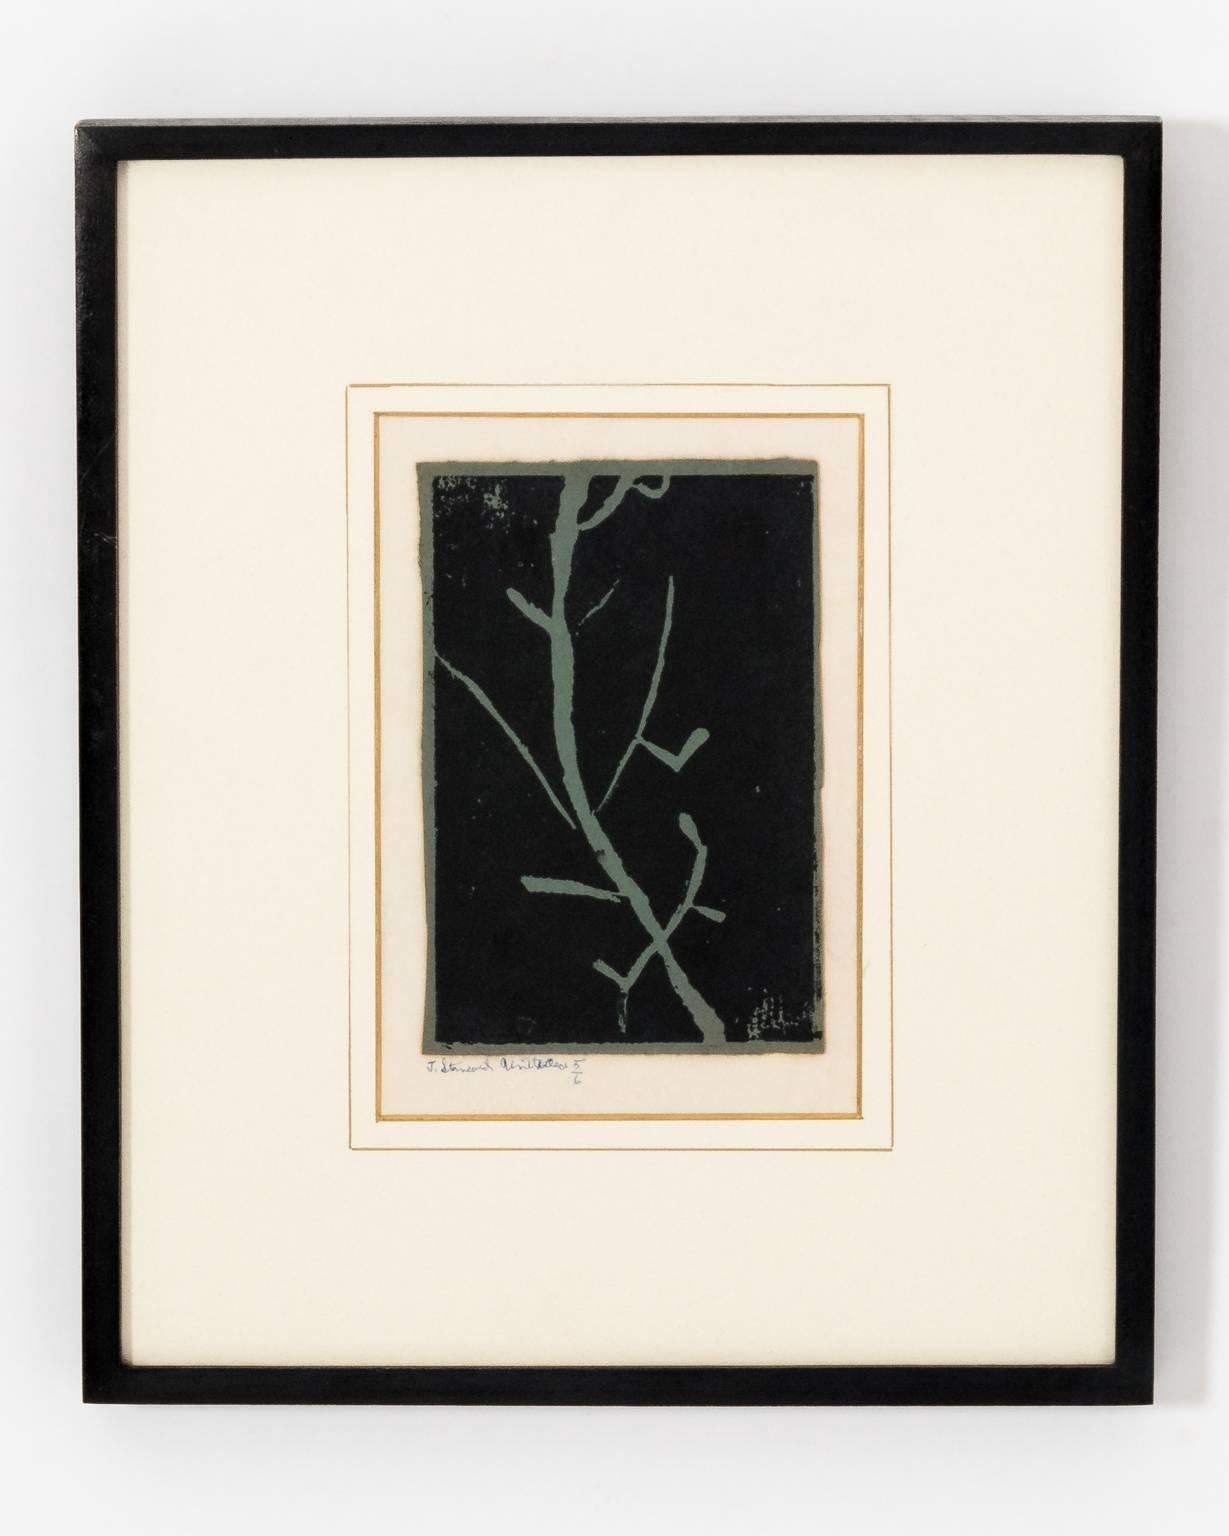 A collection of 20th century relief prints of abstract compositions. Features four different abstract compositions of organic shapes, newly framed and matted in high gloss dark gray wood frame.
The work of a branch is rendered against a black